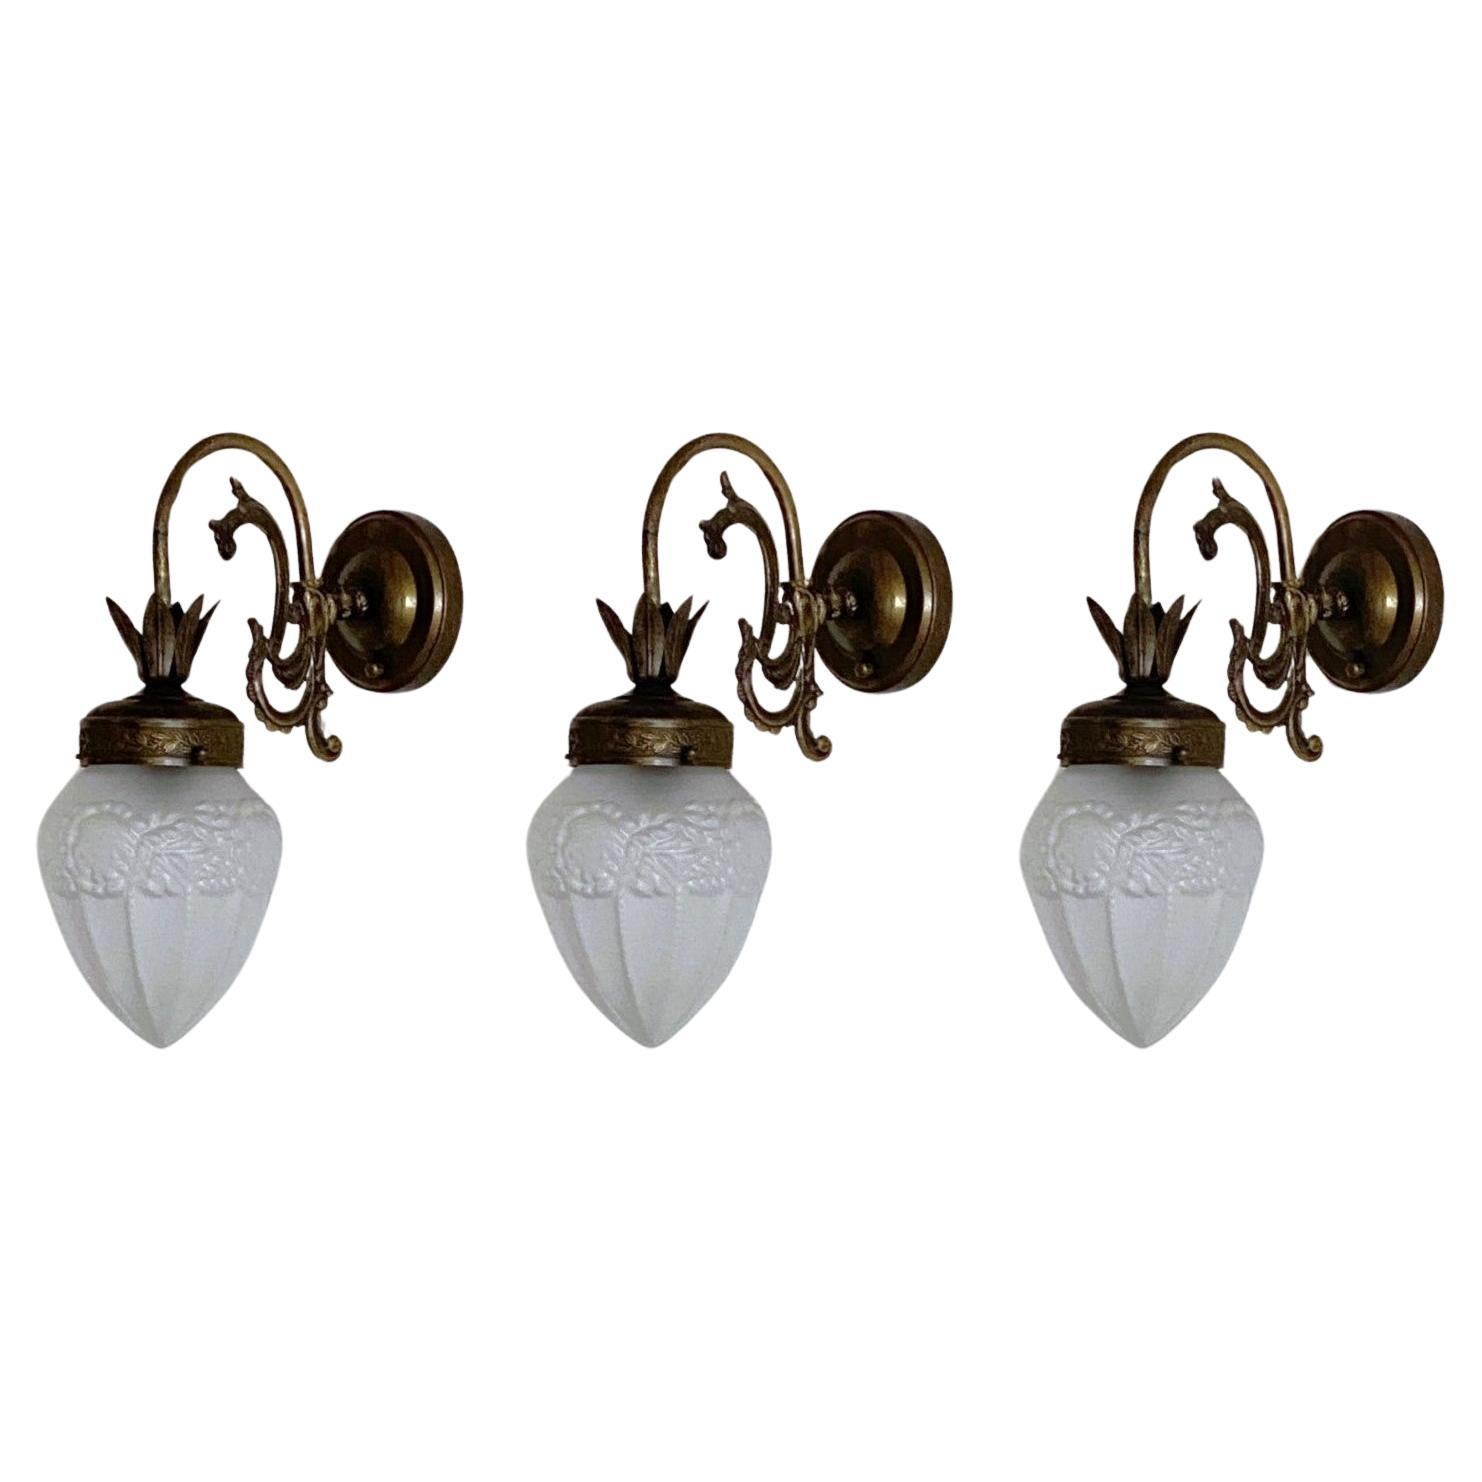 Six French Art Deco Brass Frosted Glass Wall Sconces, 1930s For Sale